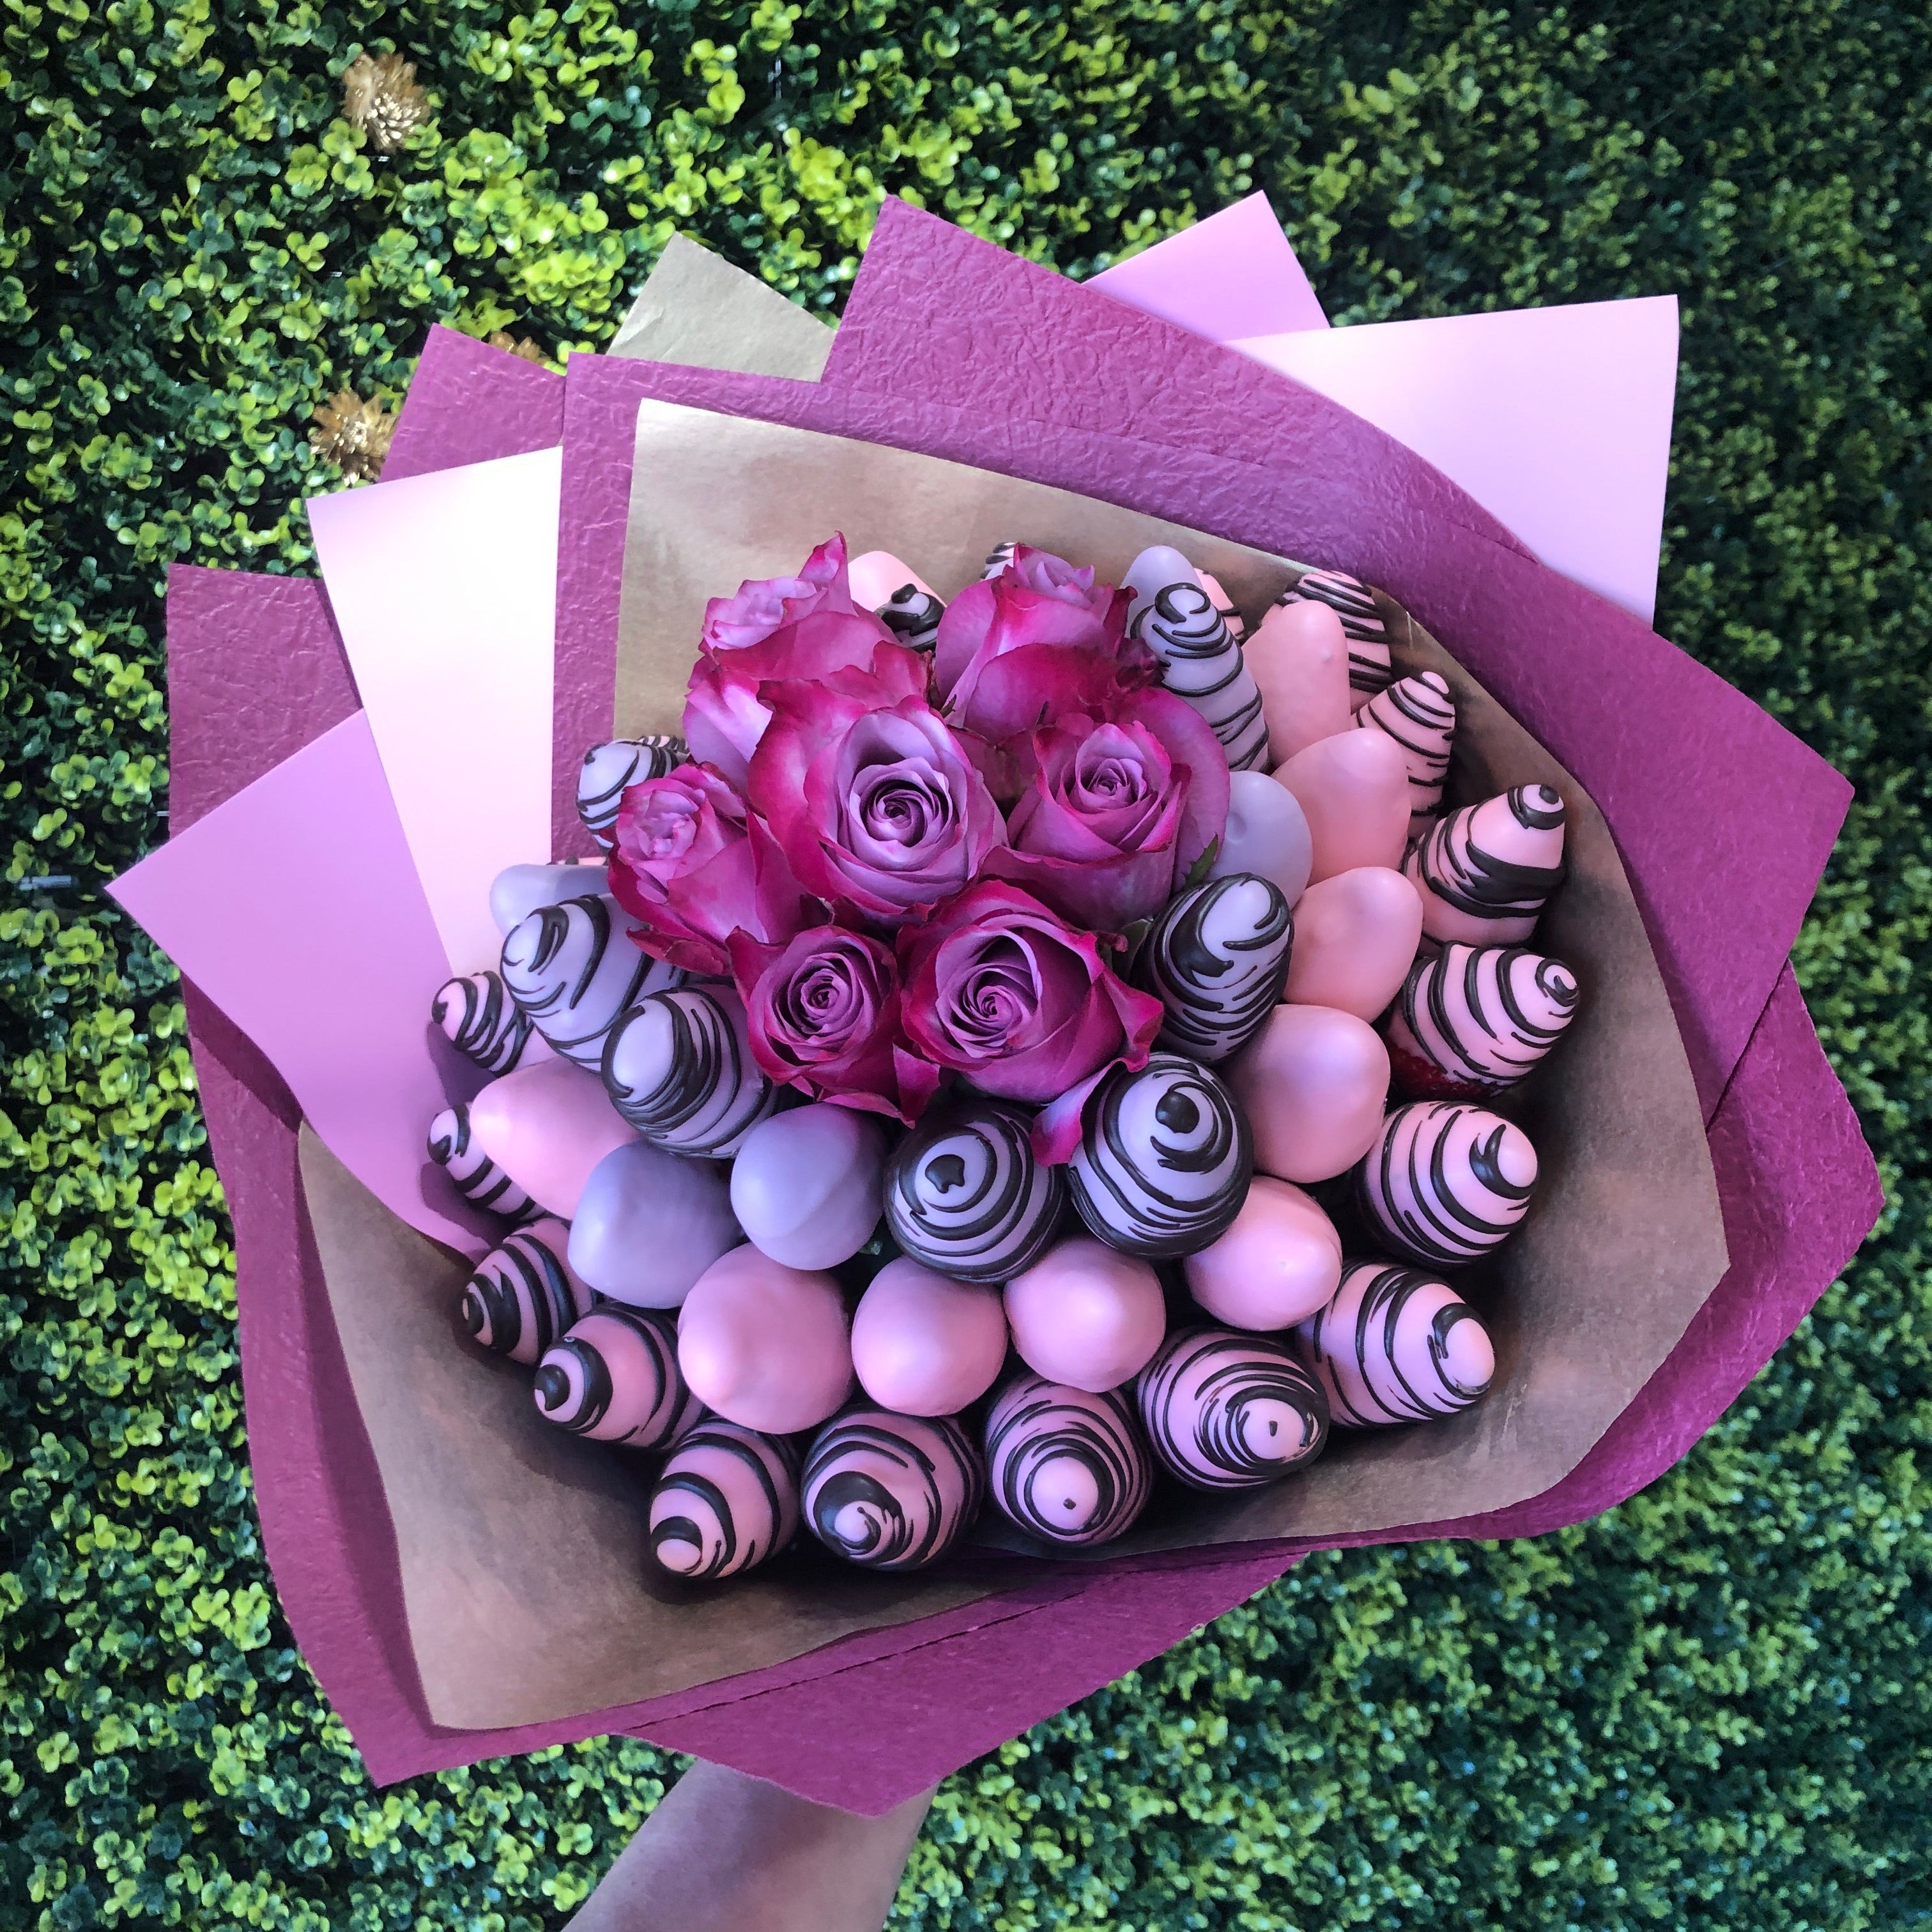 Roseberry Posie Chocolate Blooms Sweet Bouquet anniversary gift chocolate bouquet order online edible bouquet adelaide Delivery